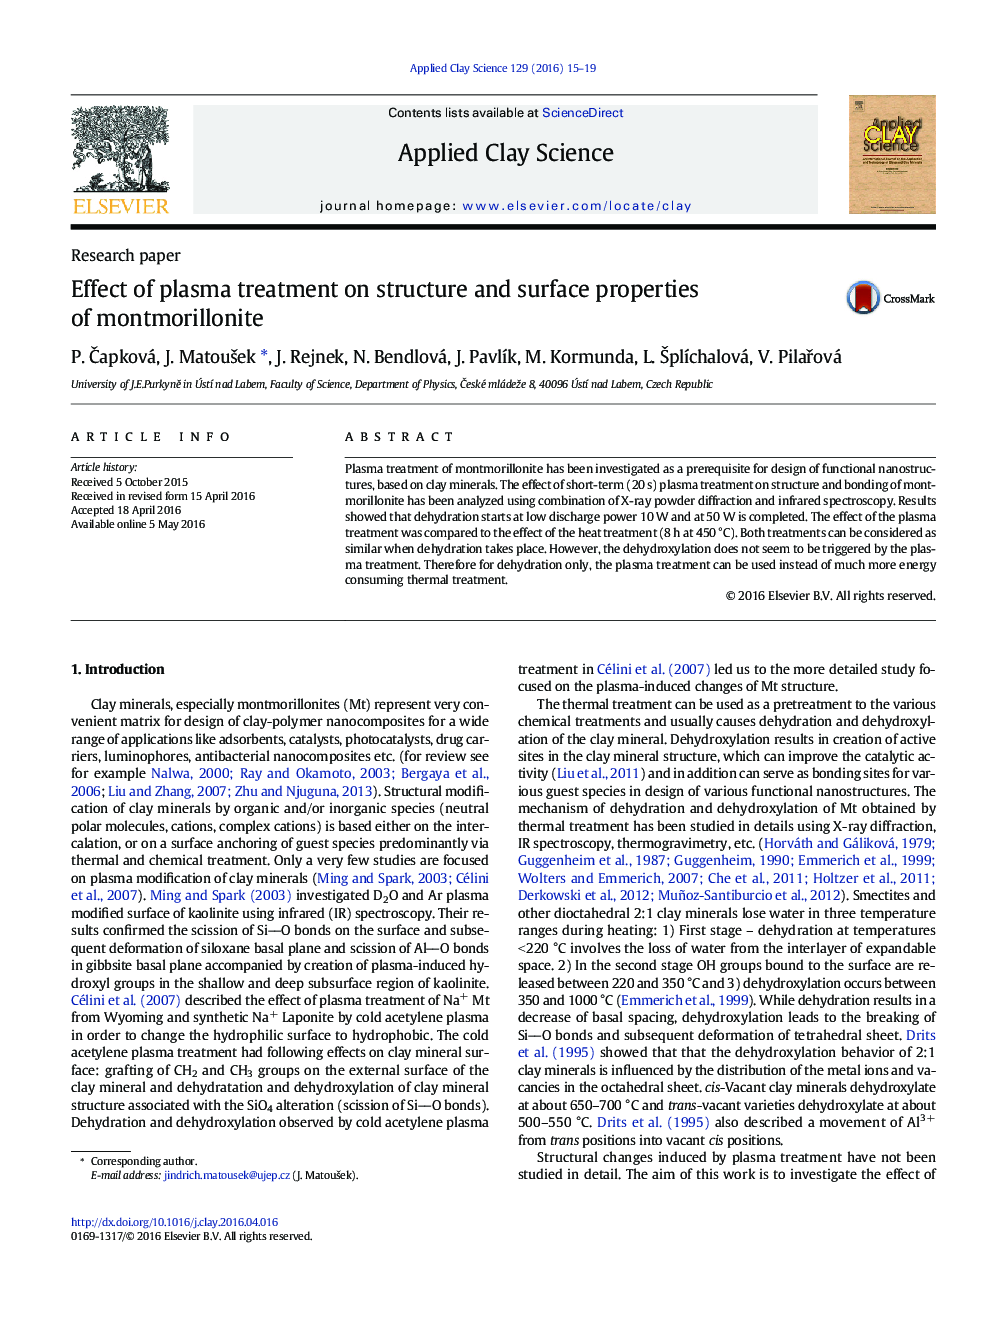 Effect of plasma treatment on structure and surface properties of montmorillonite